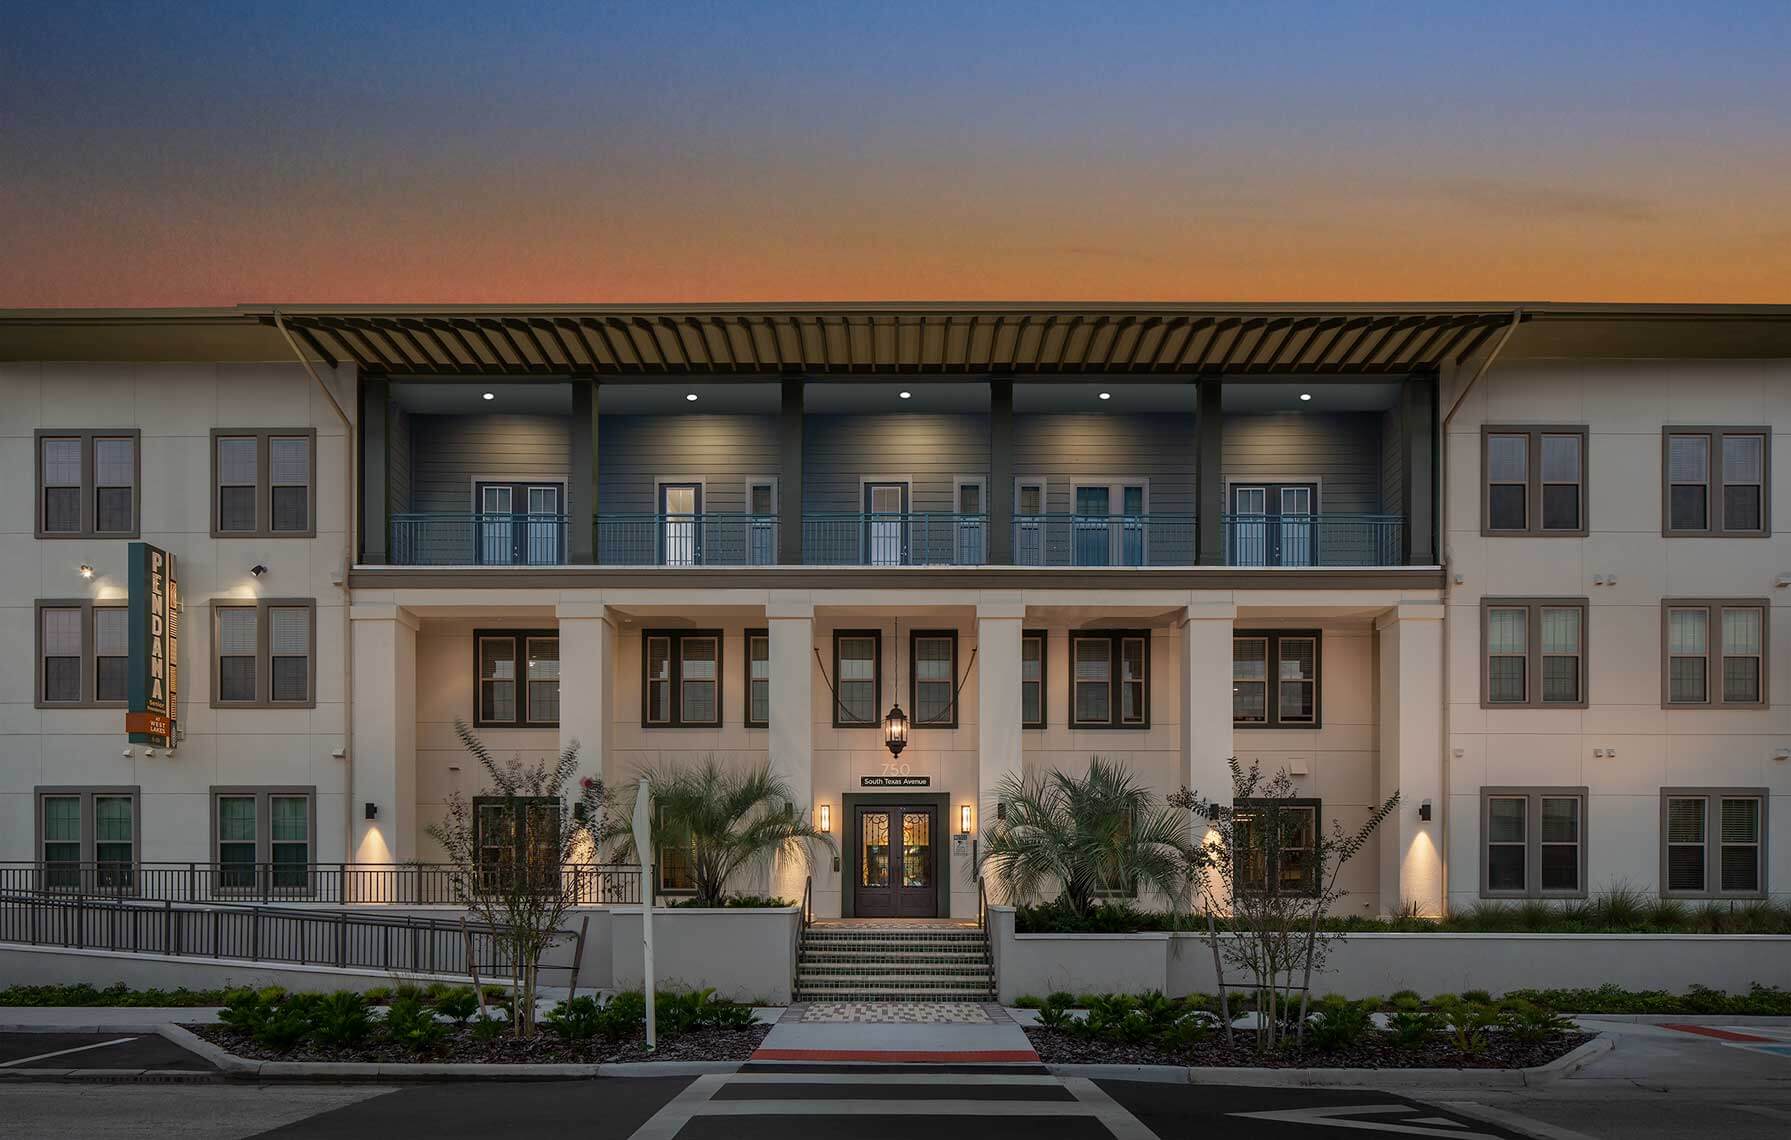 Pendana Senior Residences at West Lakes Phases I and II<br>Columbia Residential / JHP Architecture